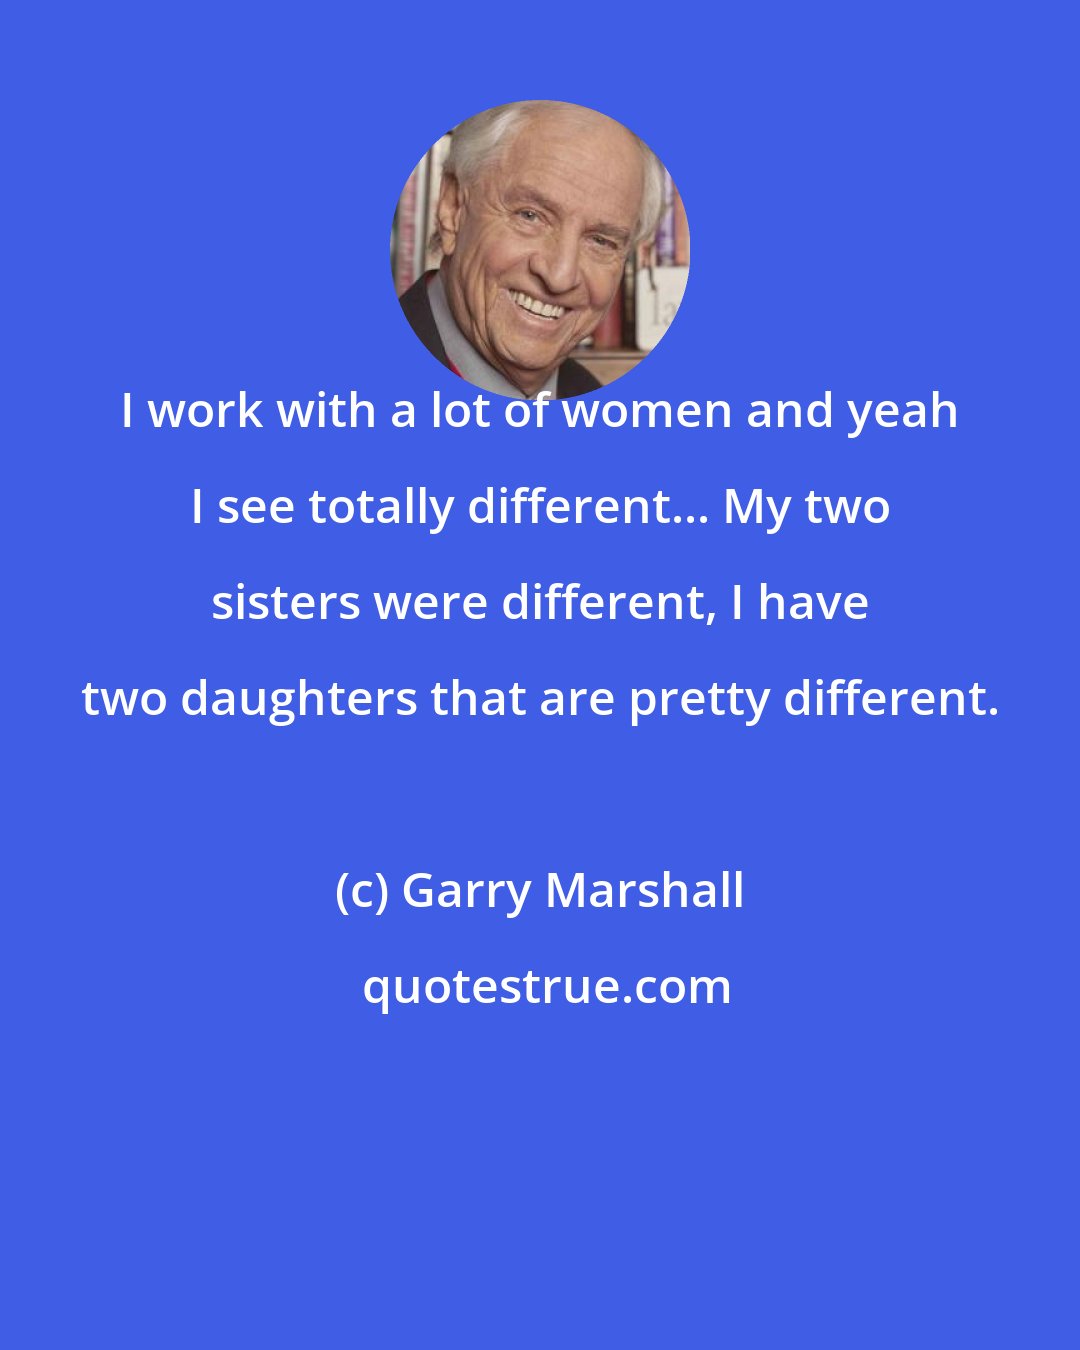 Garry Marshall: I work with a lot of women and yeah I see totally different... My two sisters were different, I have two daughters that are pretty different.